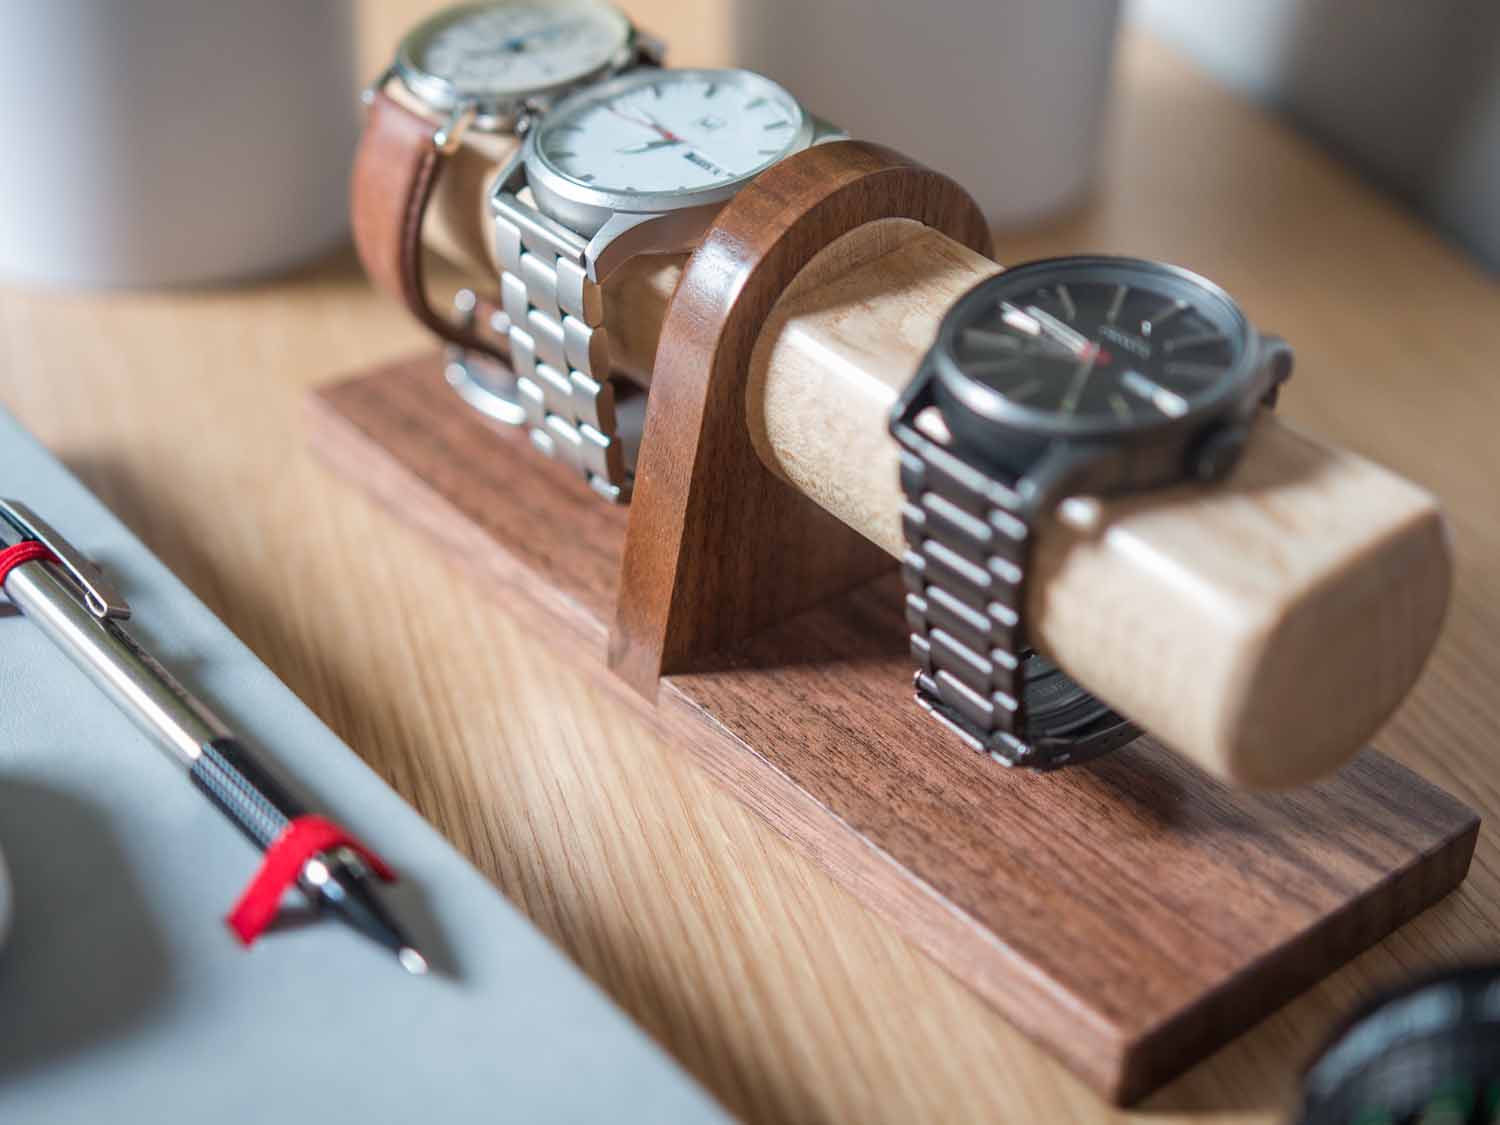 Watch display holder rests on a table, made of a long, wooden block base with one round dowel sticking out horizontally, enough space to hold four watches.